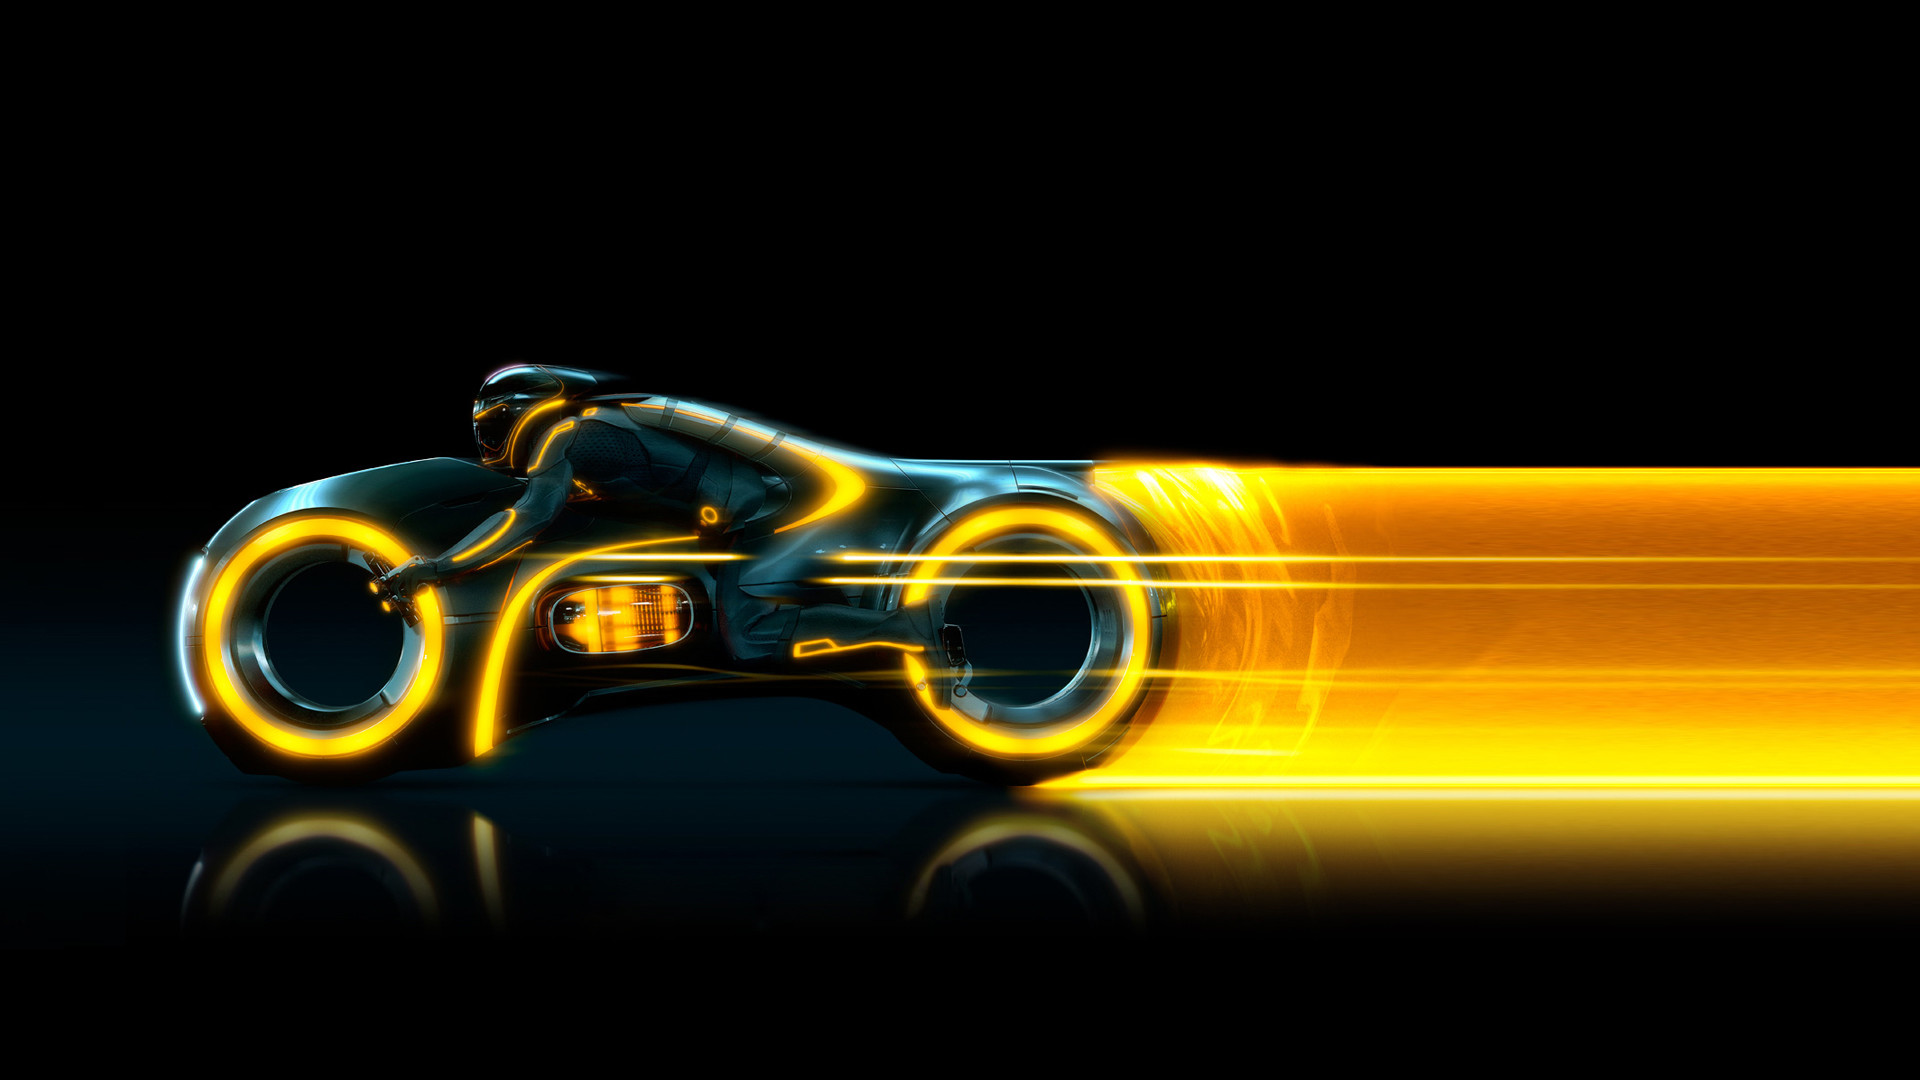 Tron Legacy Background Imgur 19201080 Tron Legacy Backgrounds 42 Wallpapers Adorable